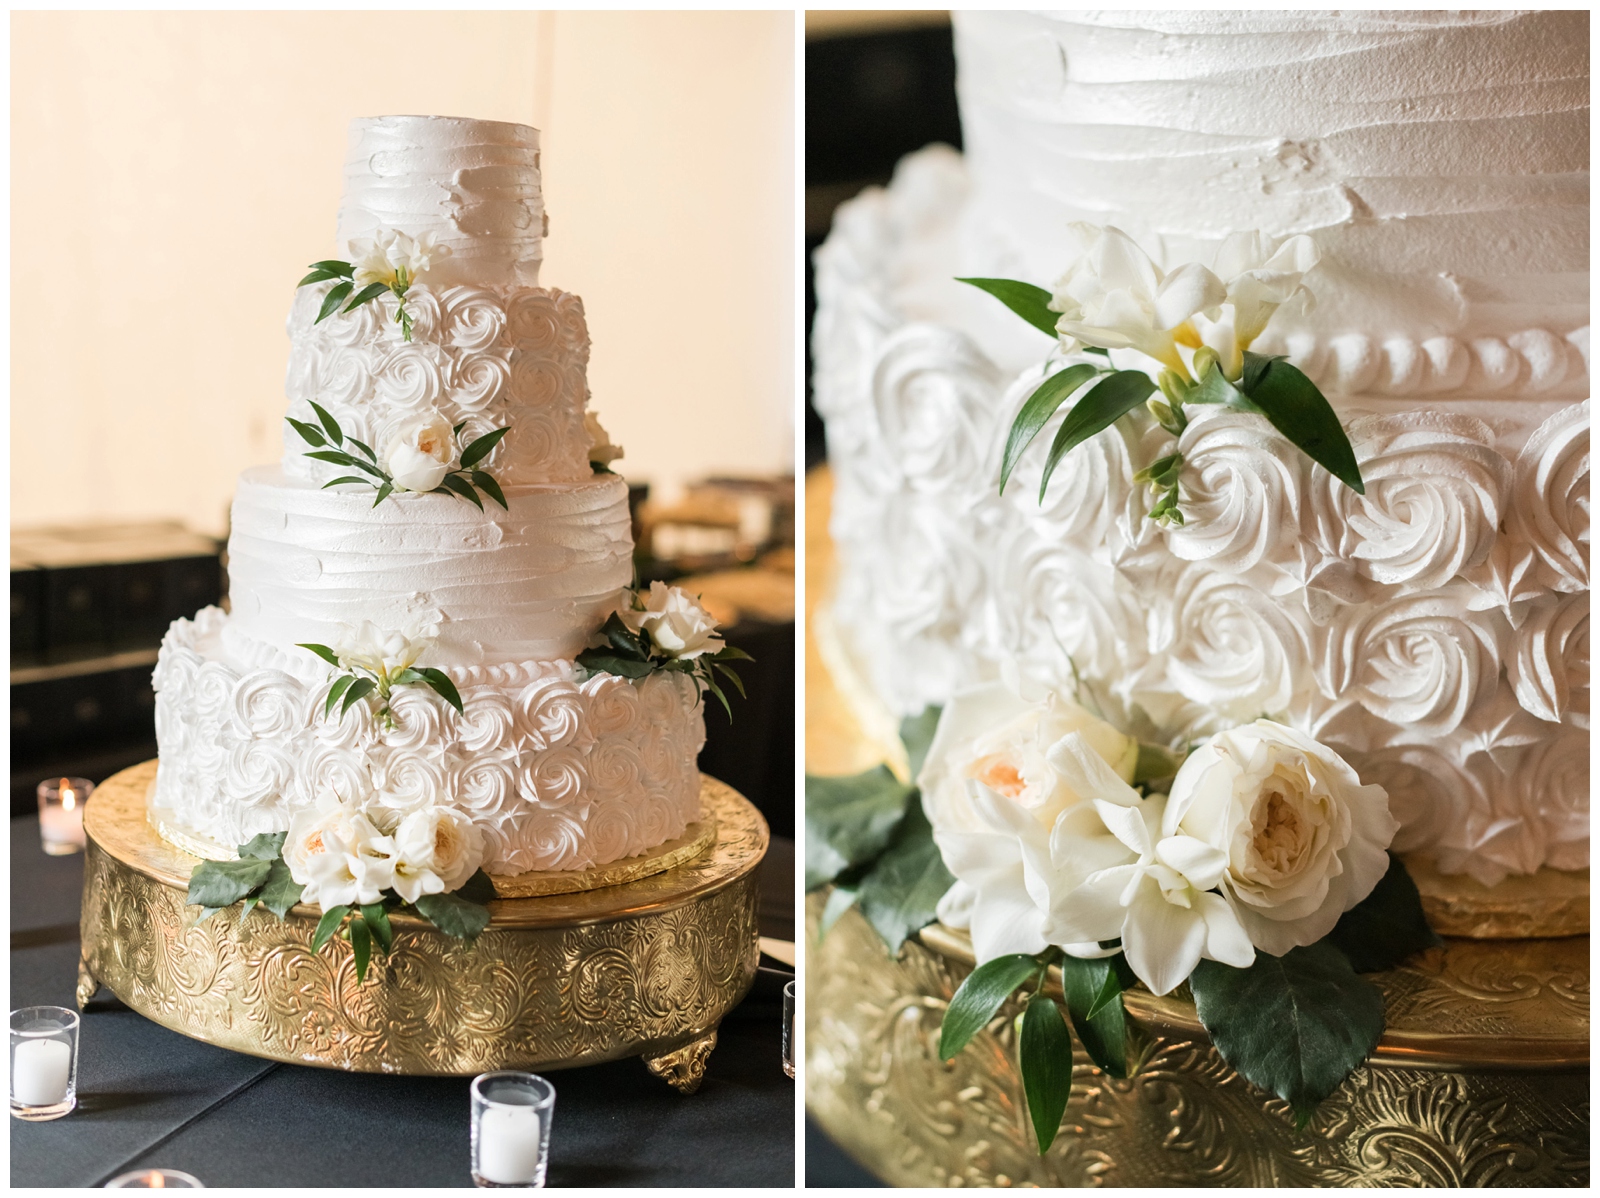 four tiered wedding cake with white icing and white rose accents by Checkerboard Cheesecake